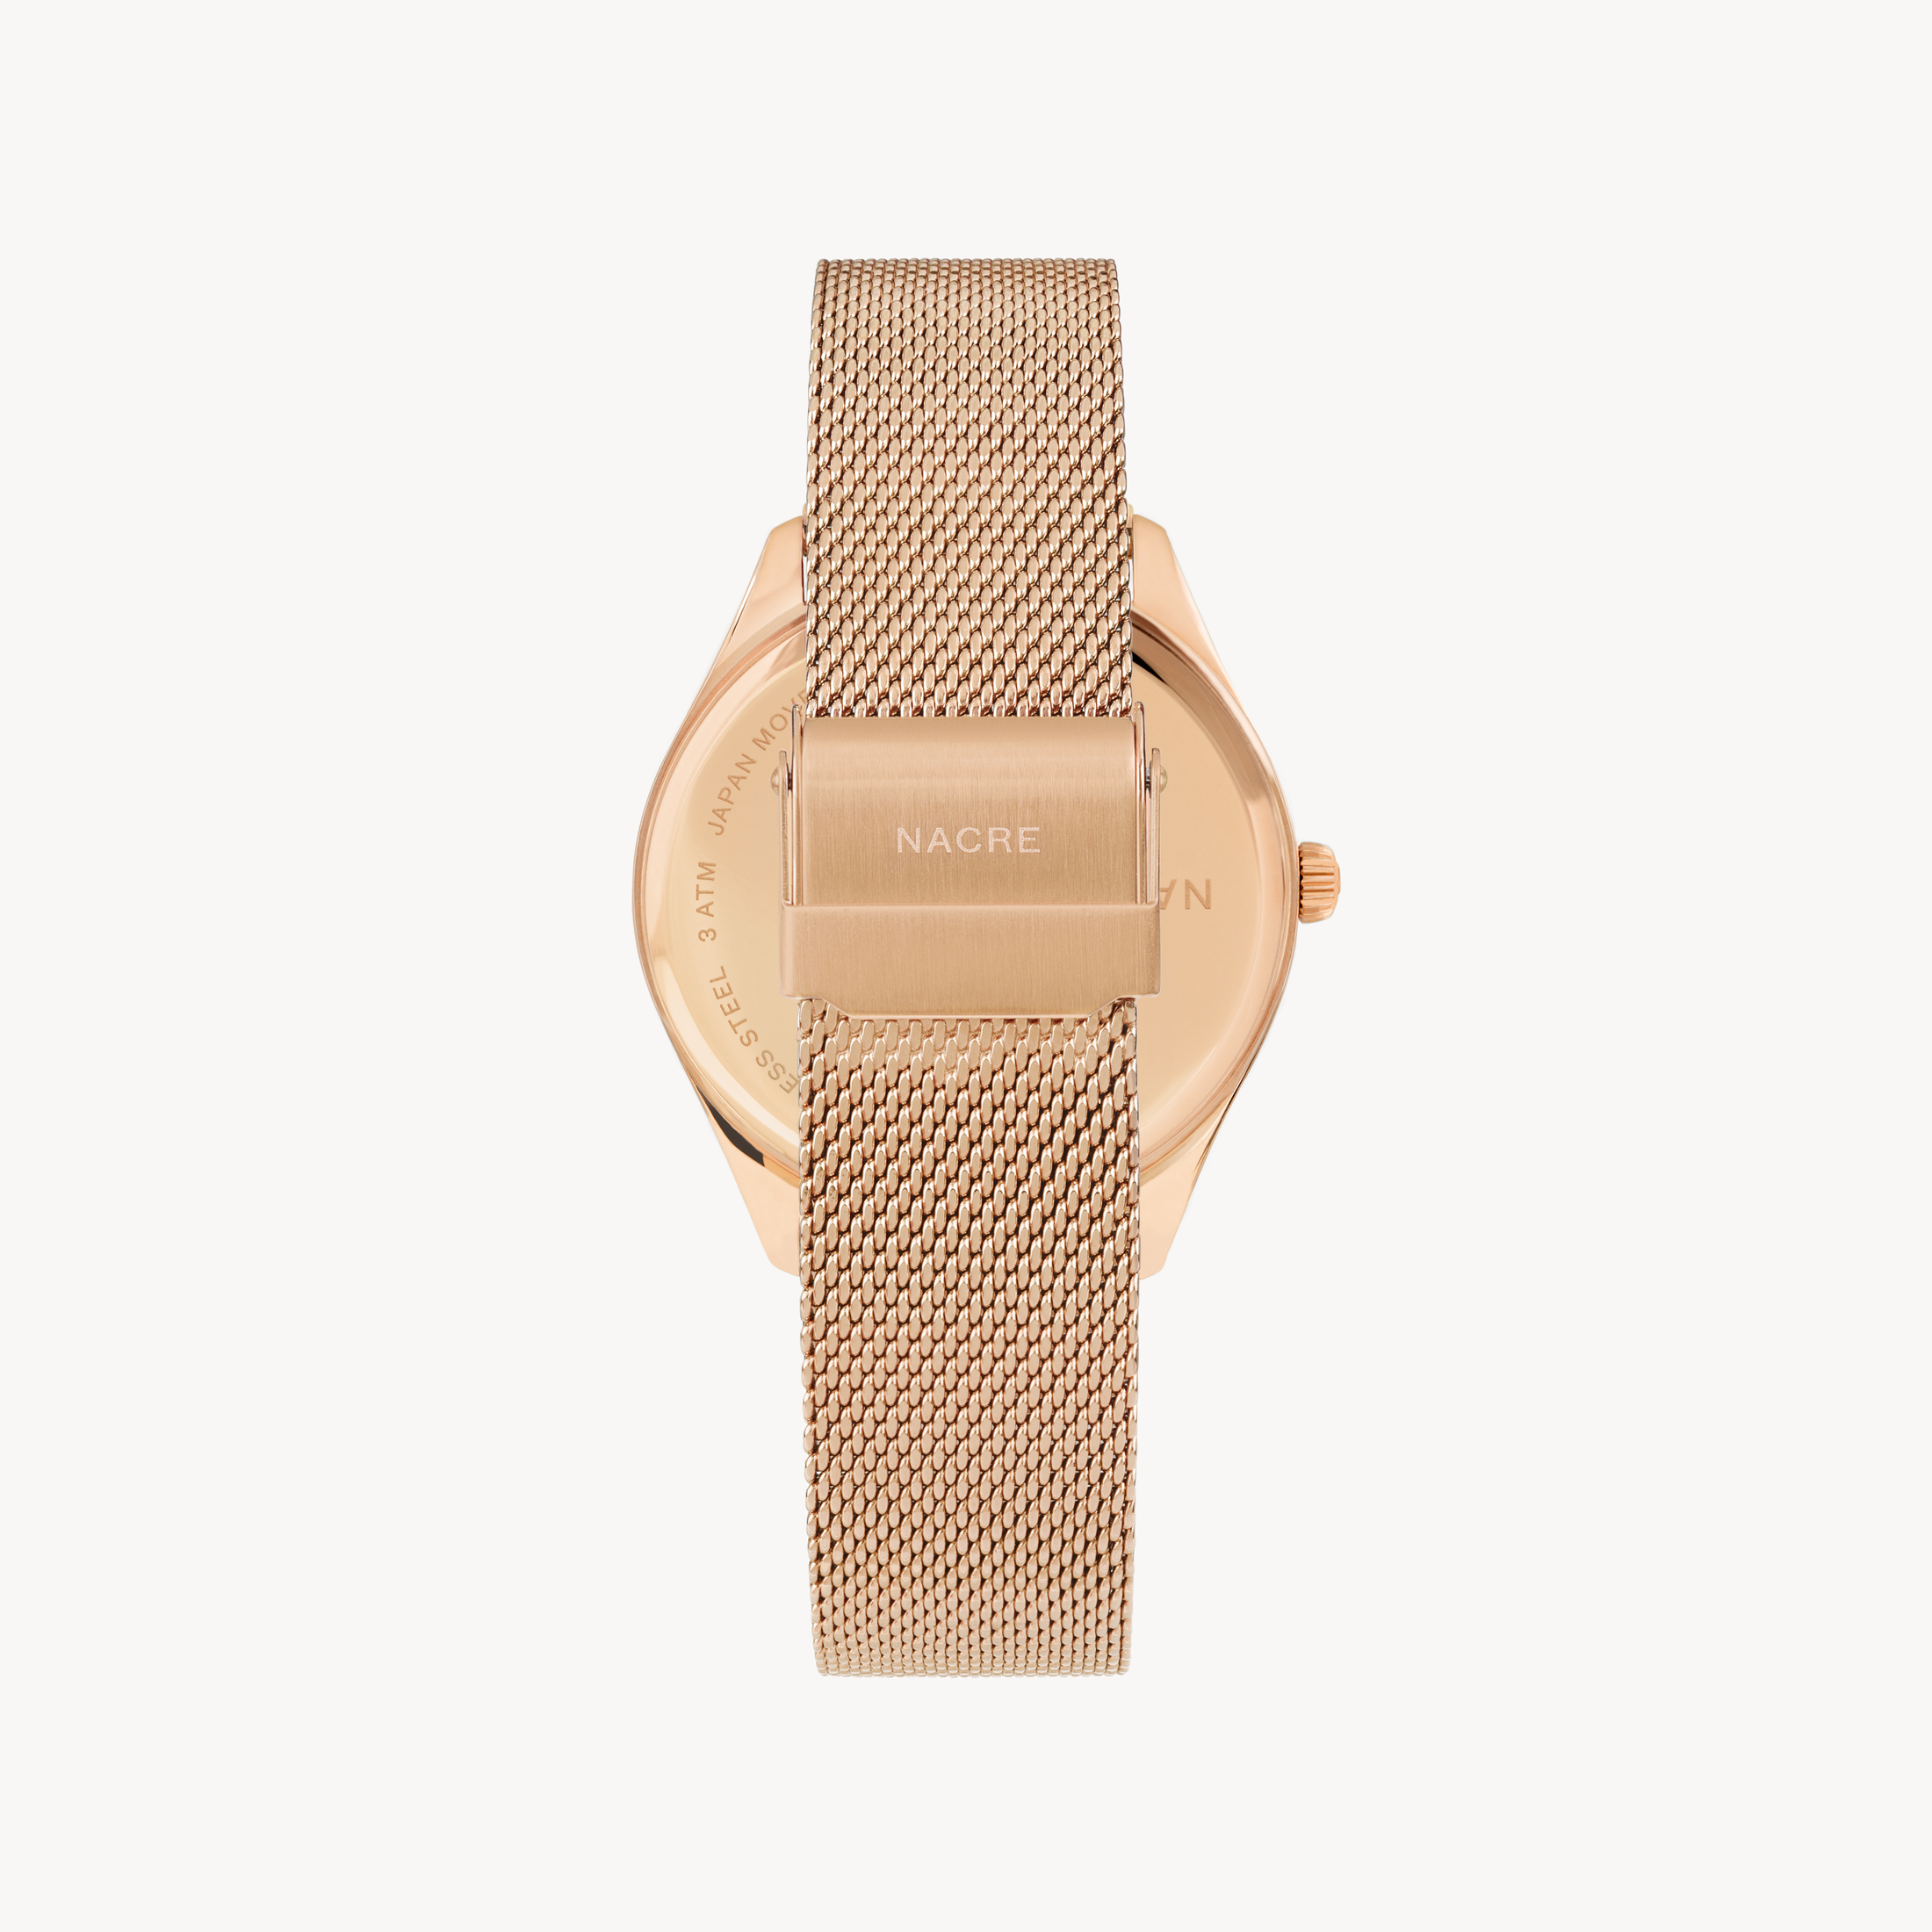 Lune 8 - Rose Gold and White - Rose Gold Mesh